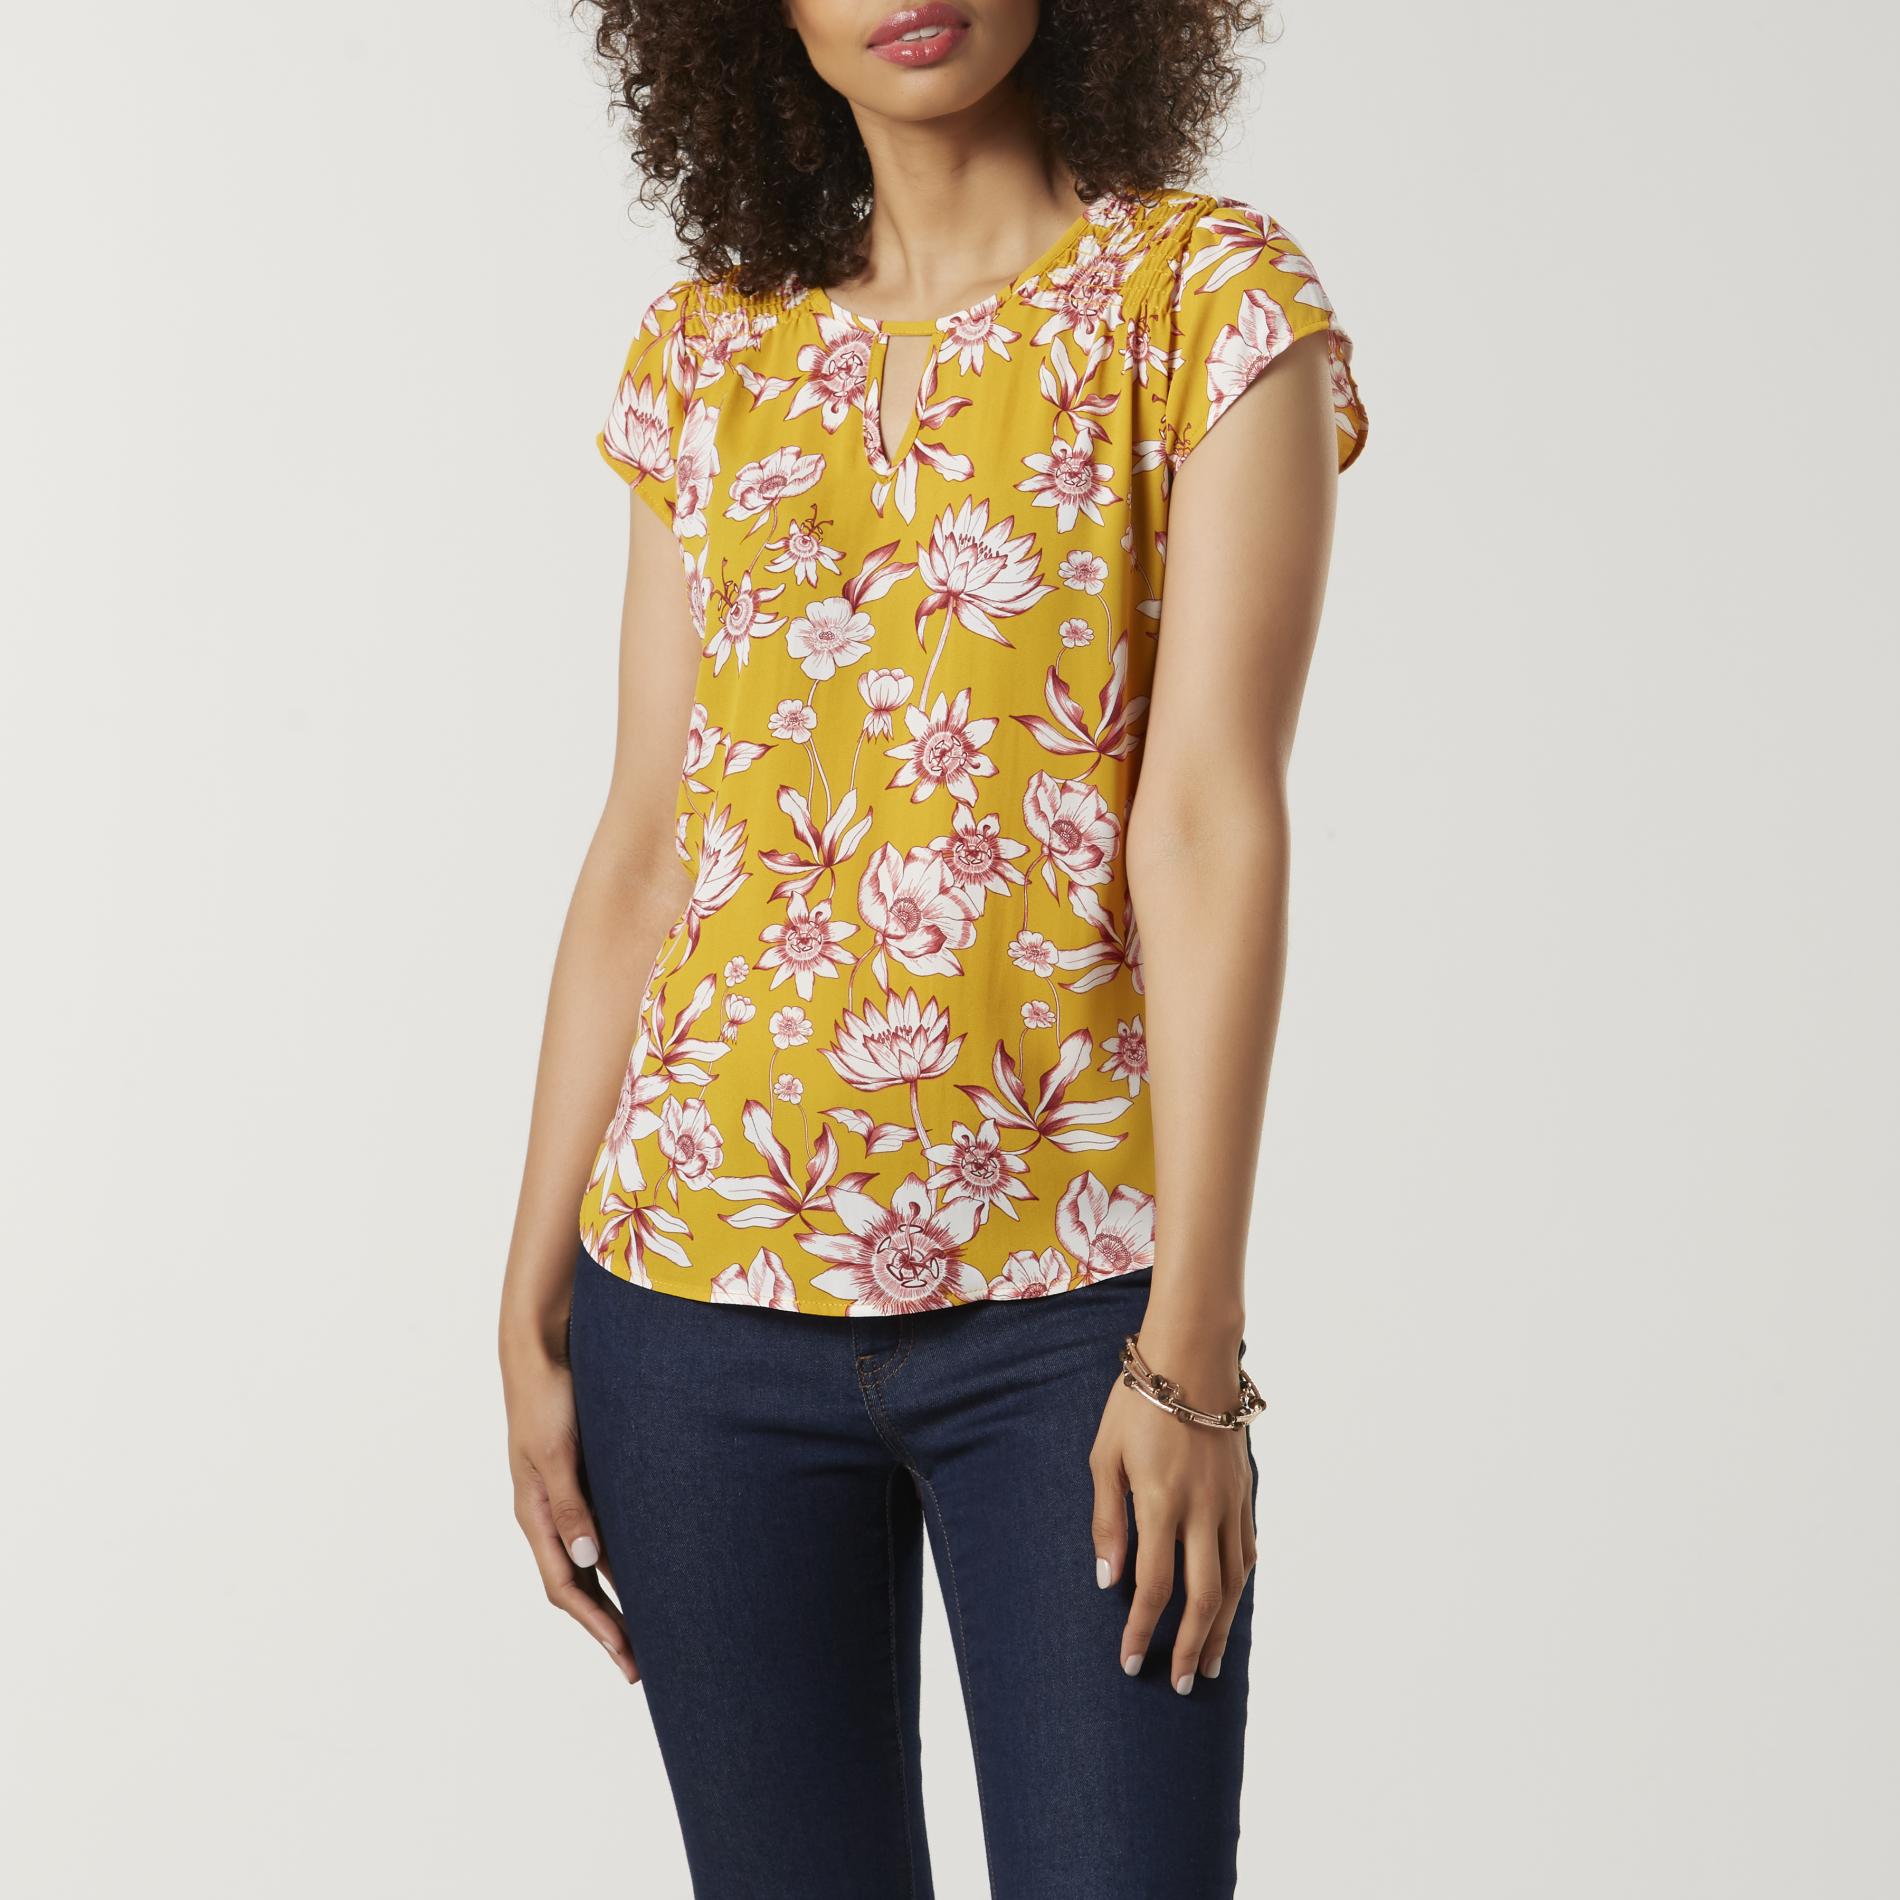 Simply Styled Women's Smocked Shoulder Top - Floral